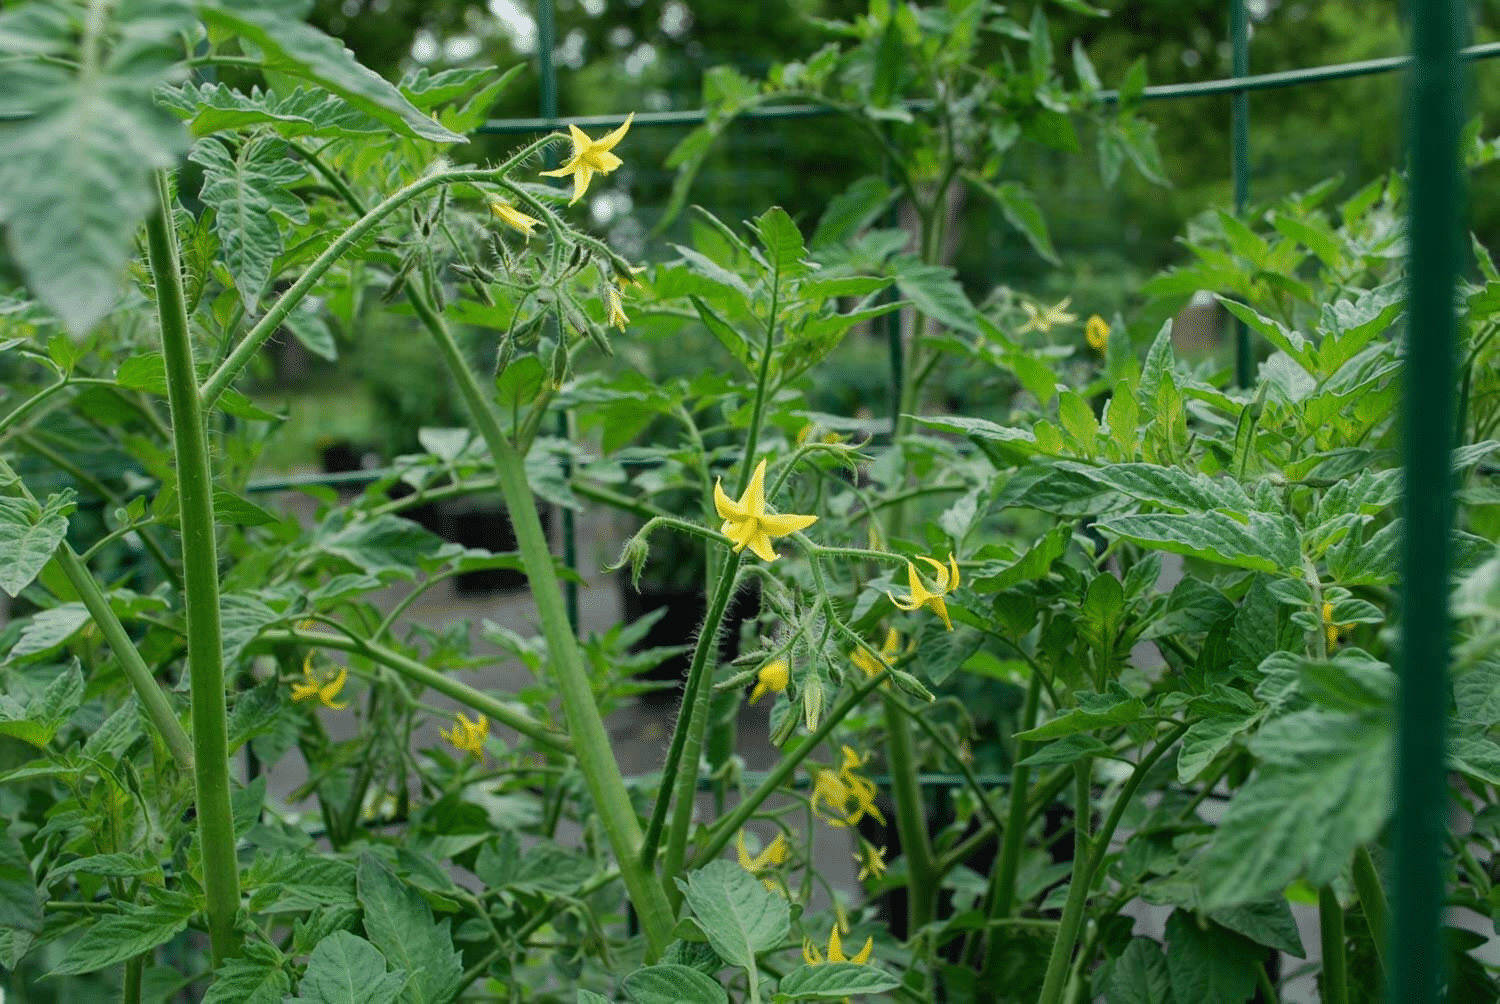 Tomato plants with healthy leaves and no aphids